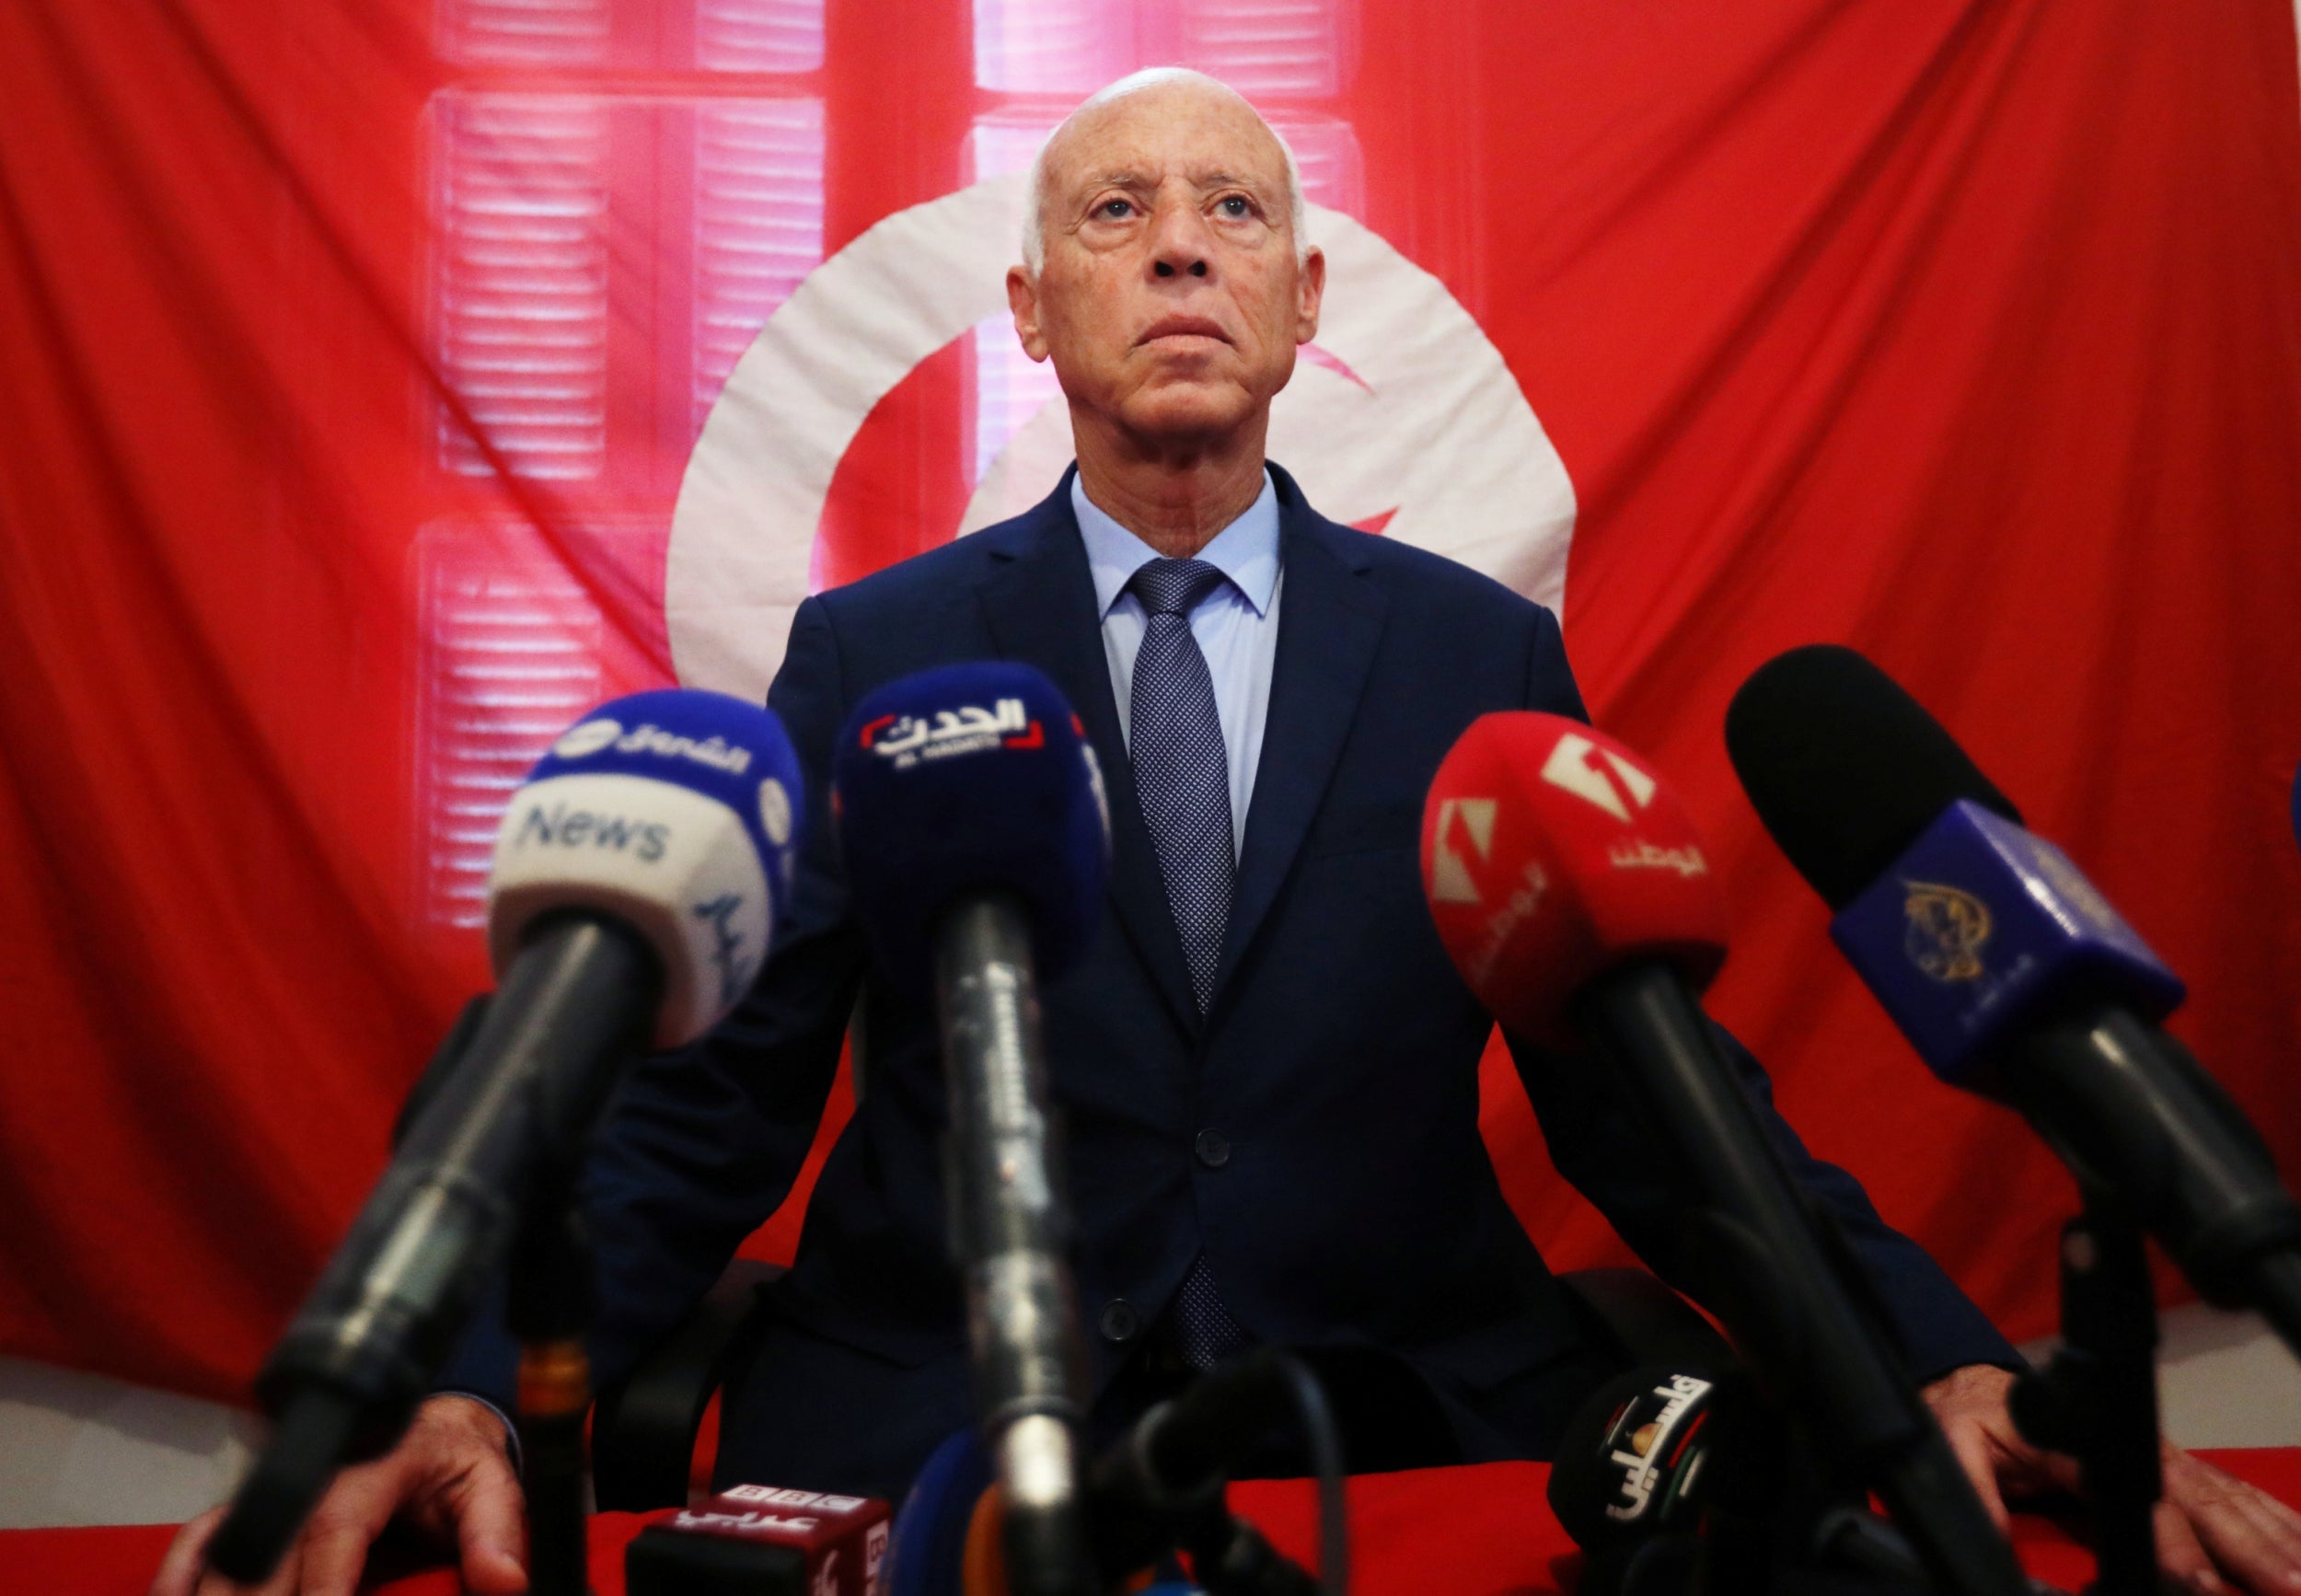 Presidential candidate Kais Saied speaks as he attends a news conference after the announcement of the results in the first round of Tunisia's presidential election in Tunis, Tunisia September 17, 2019.